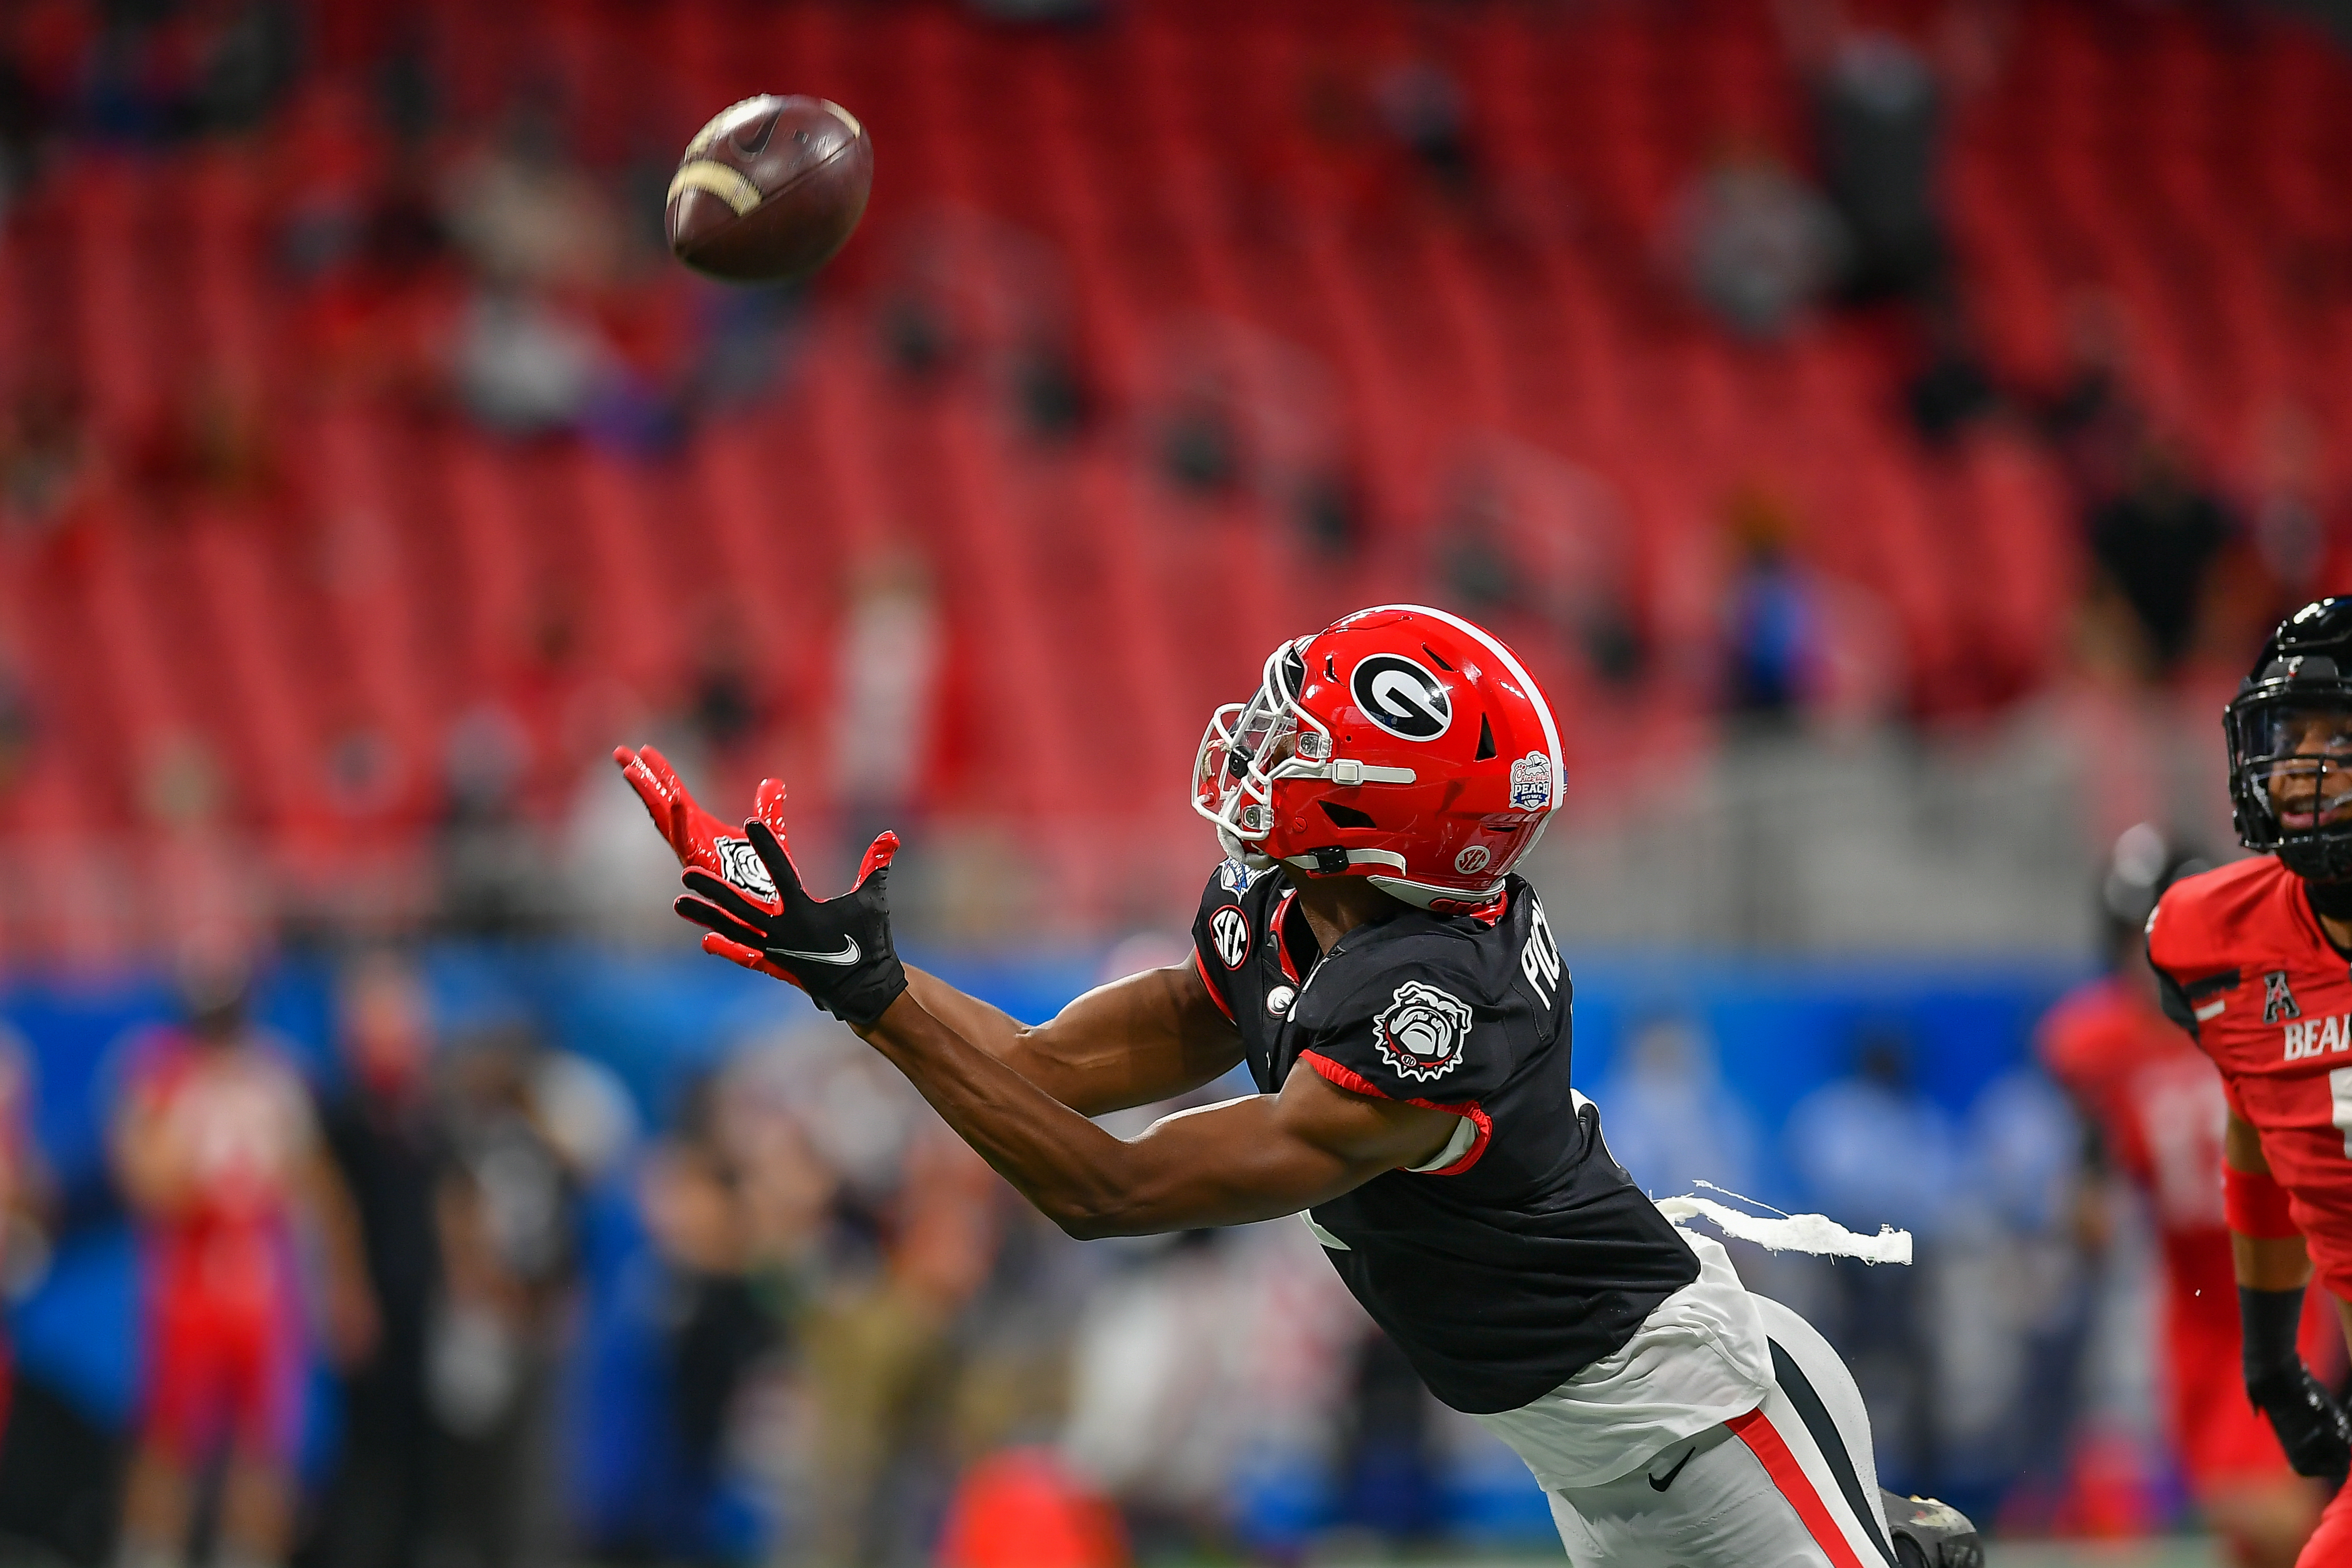 George Pickens (WR, Georgia): Dynasty and NFL Draft Outlook